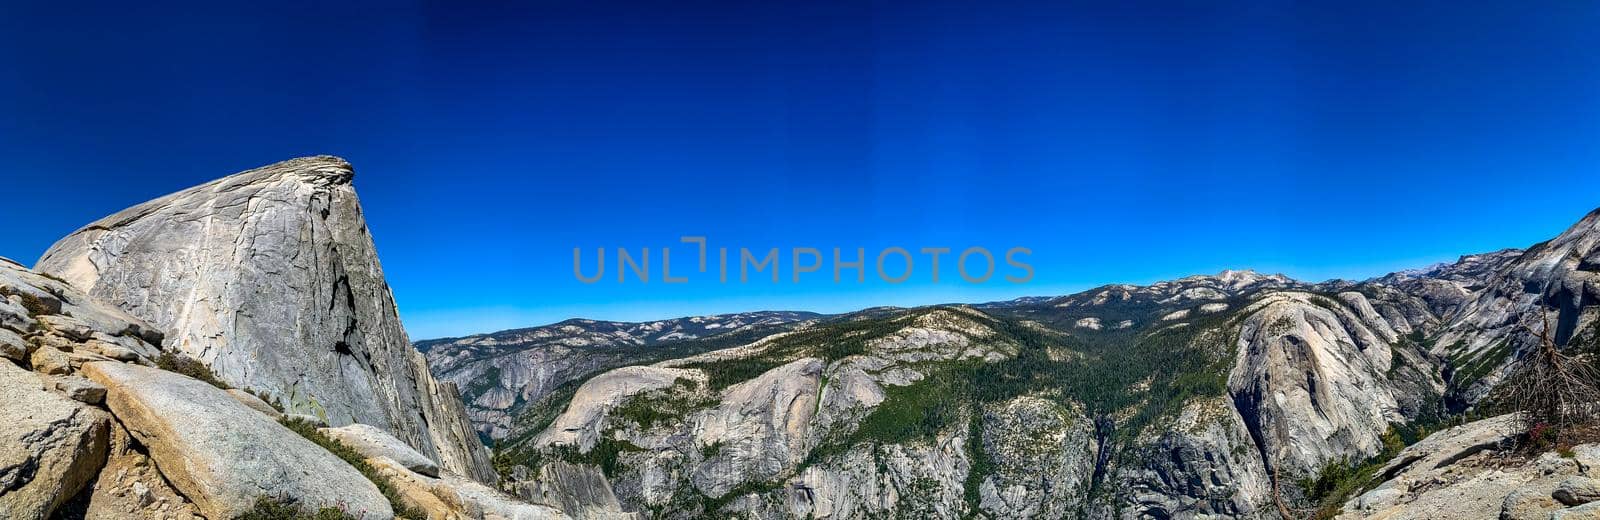 Half Dome in Yosemite National Park by gepeng